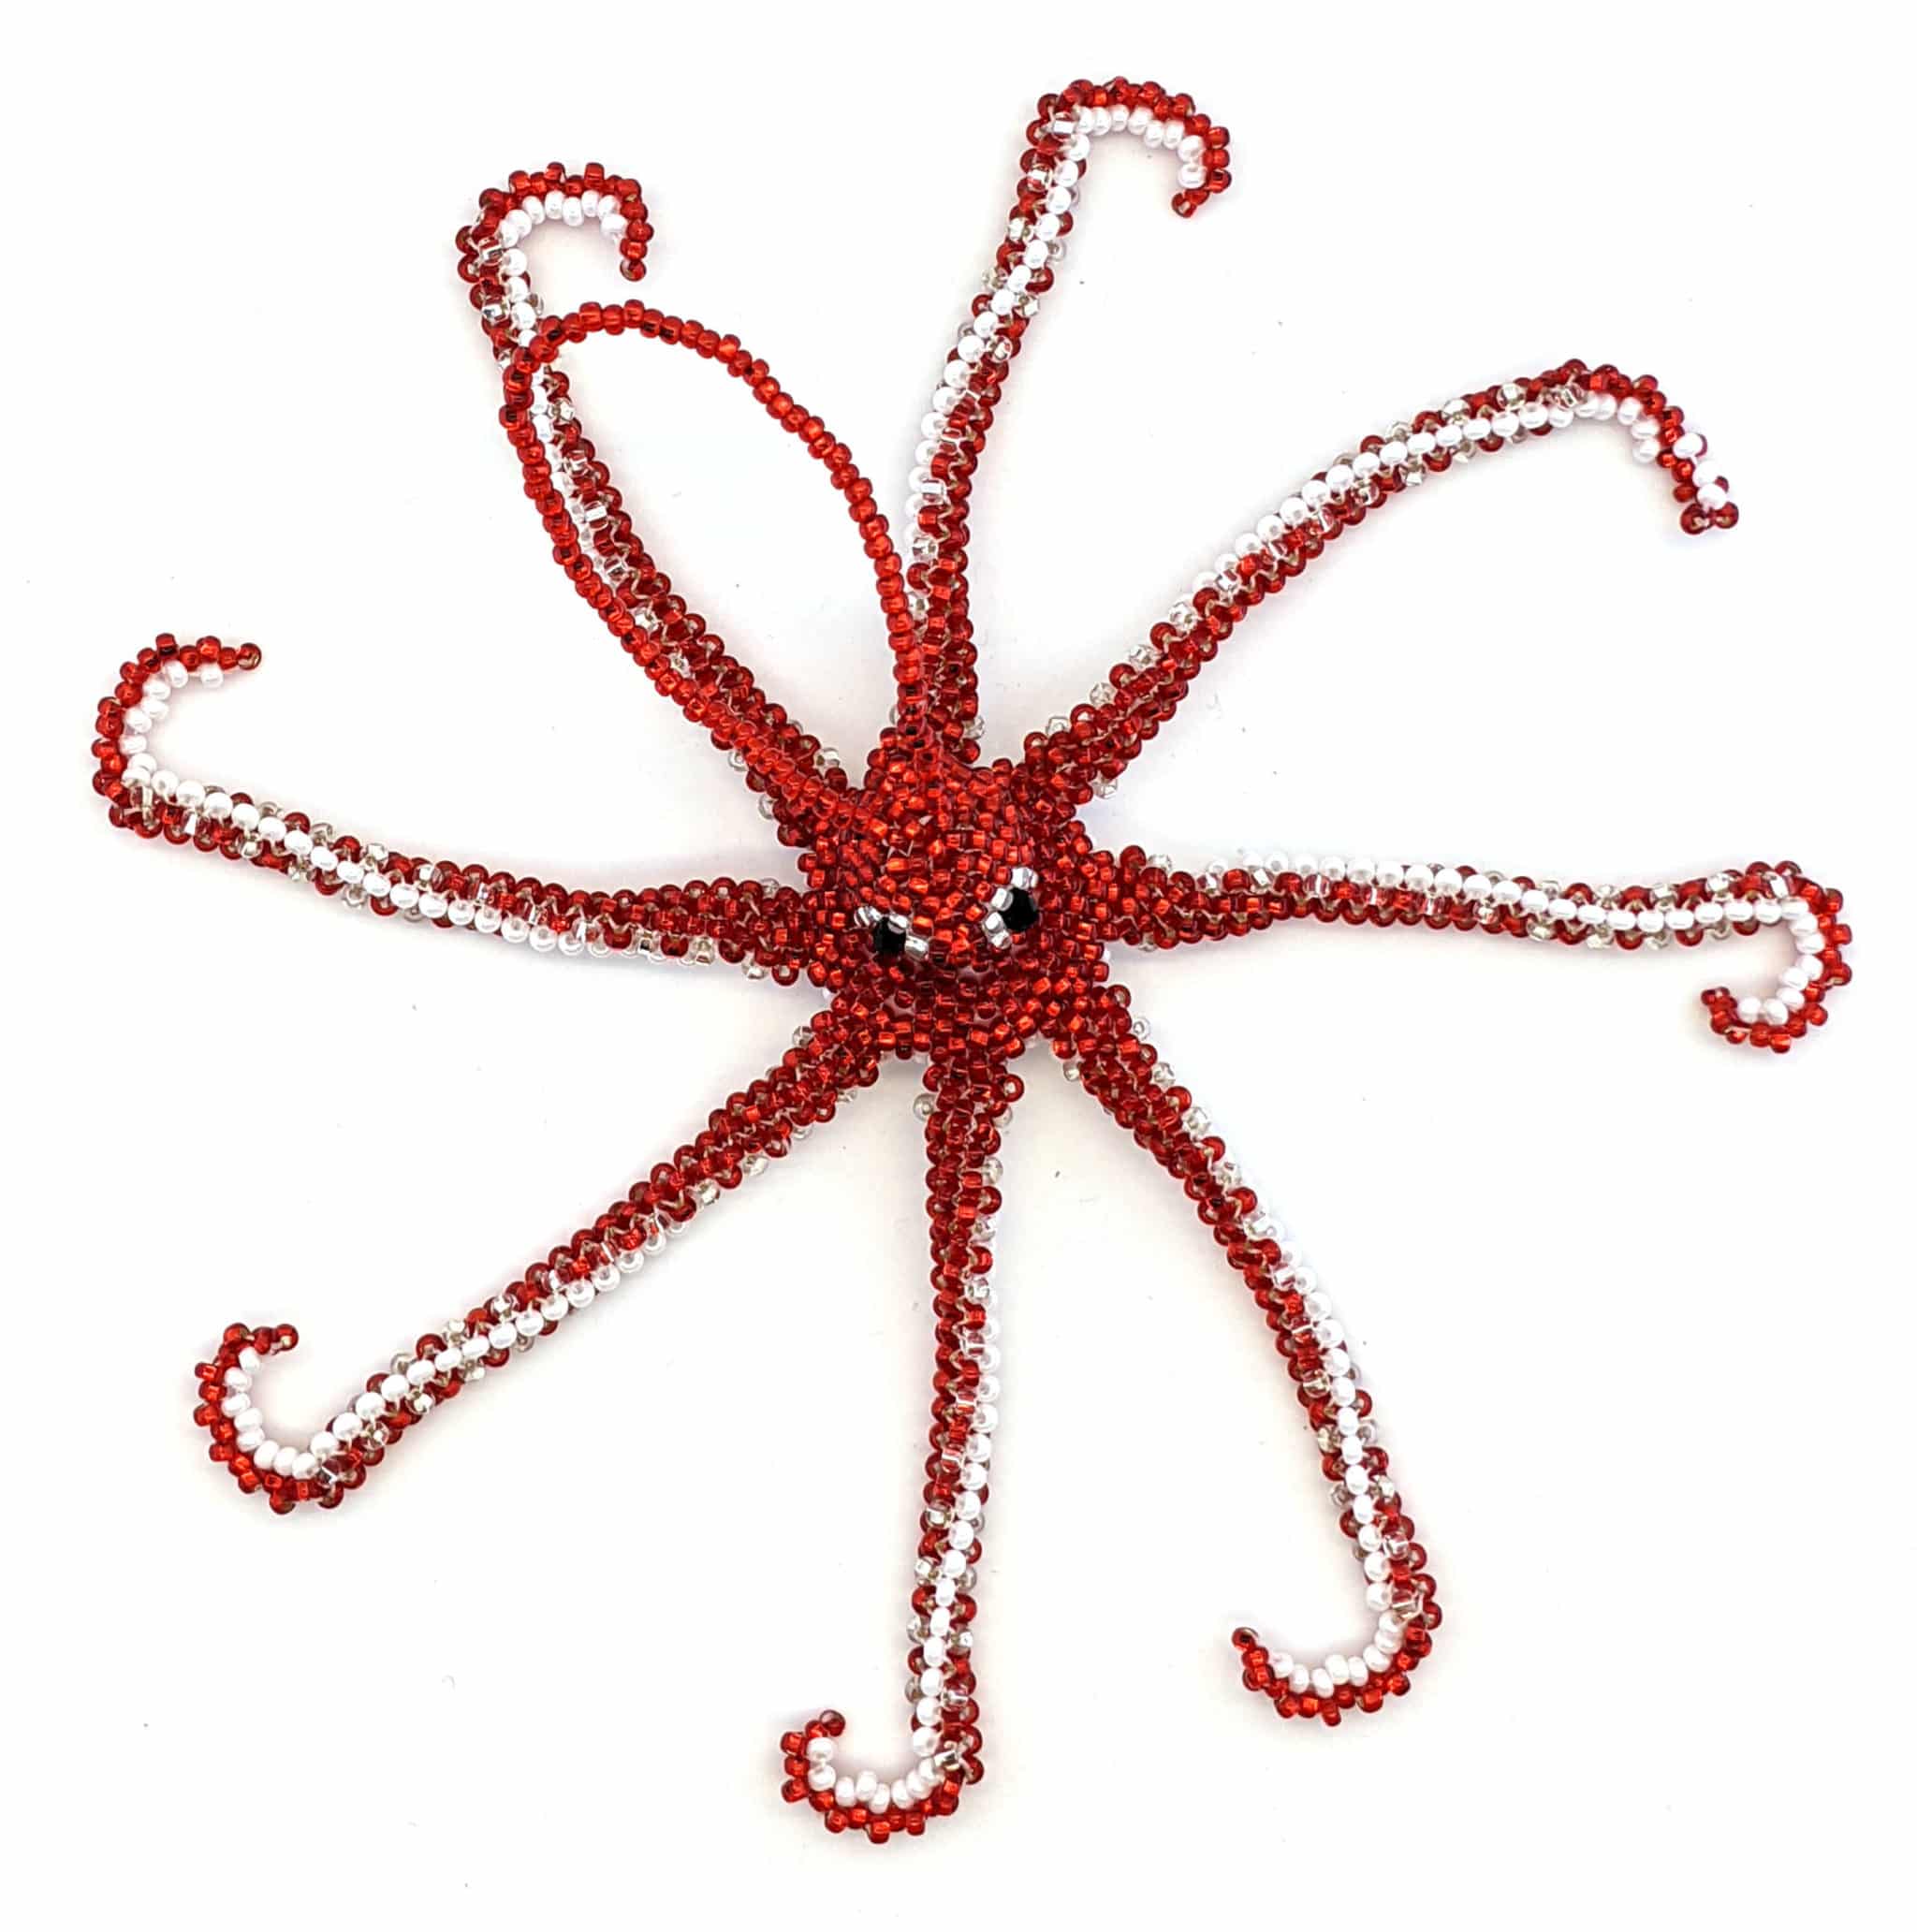 Octopus Beaded Ornament - Red